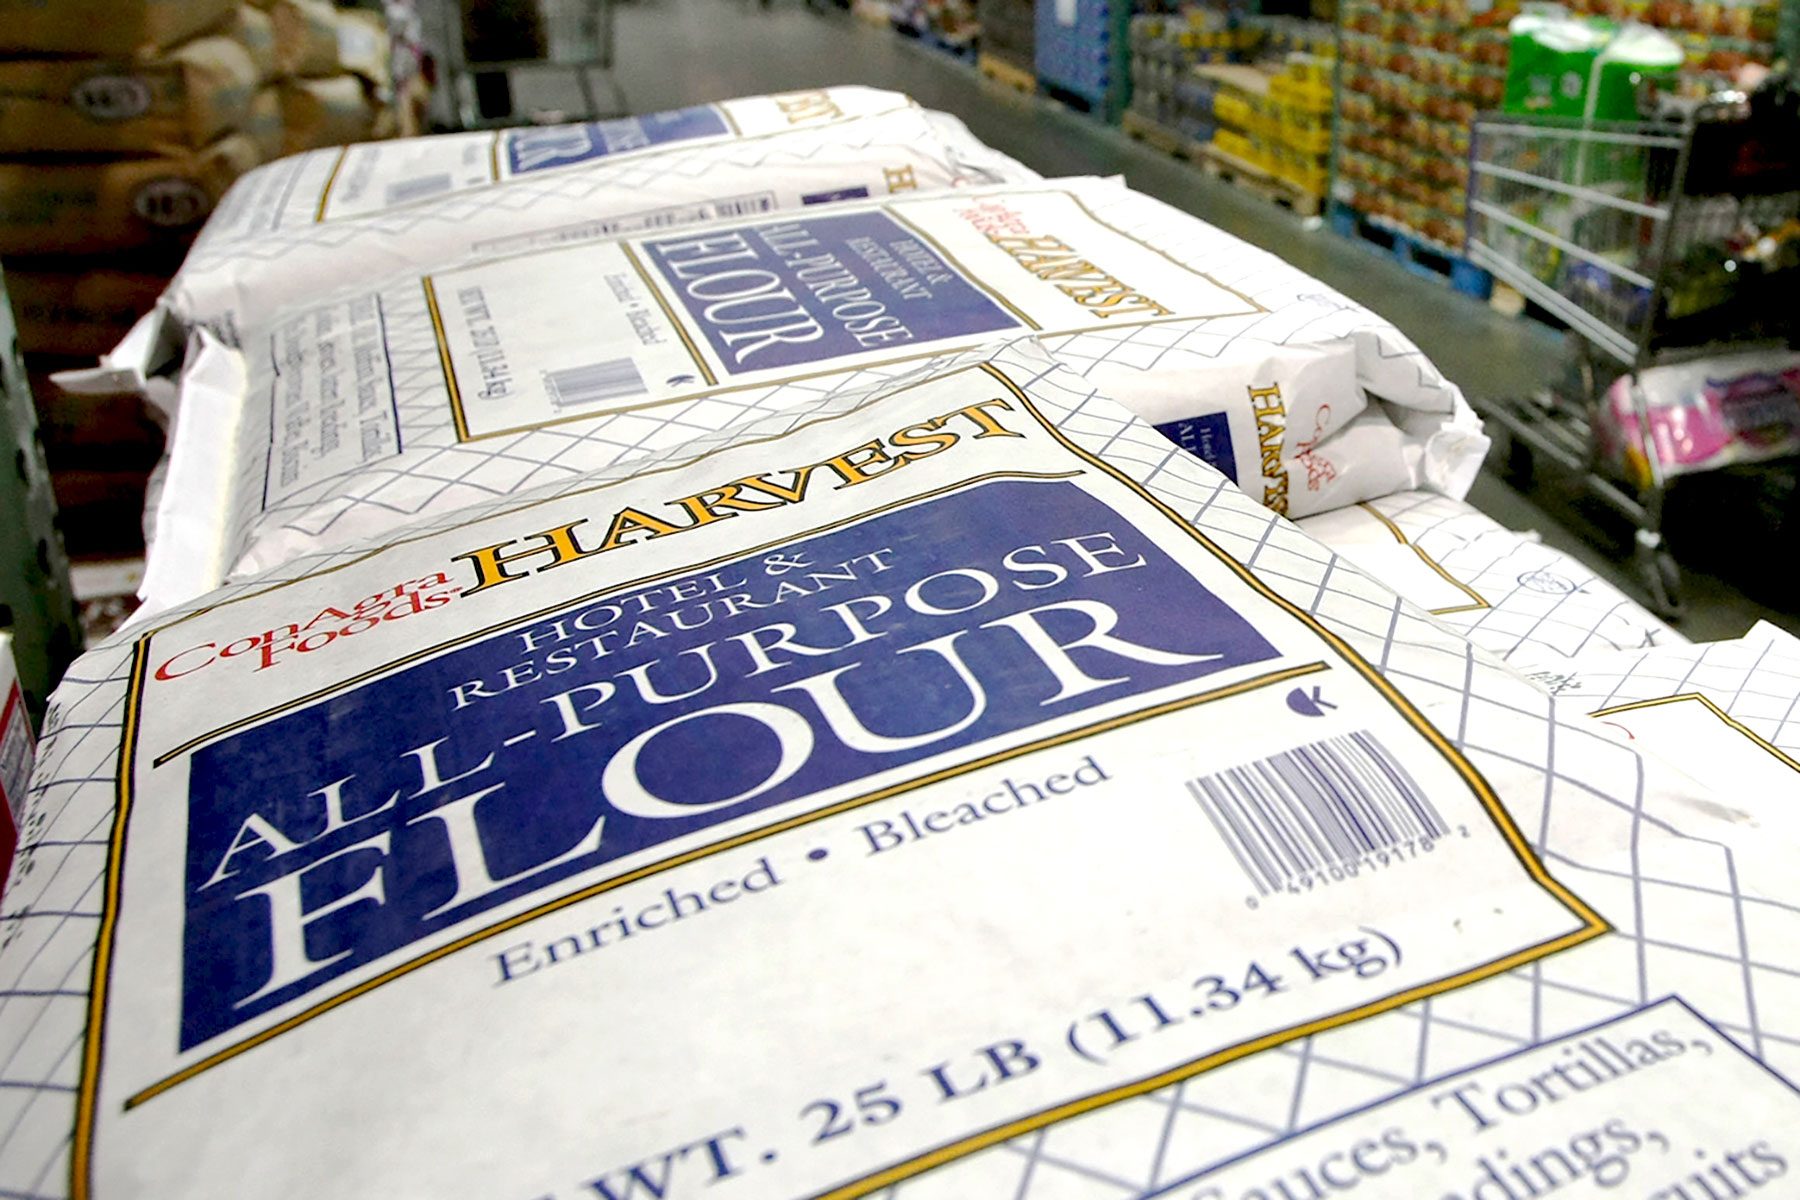 Bags of Flour Displayed at a Costco Store in San Francisco, California